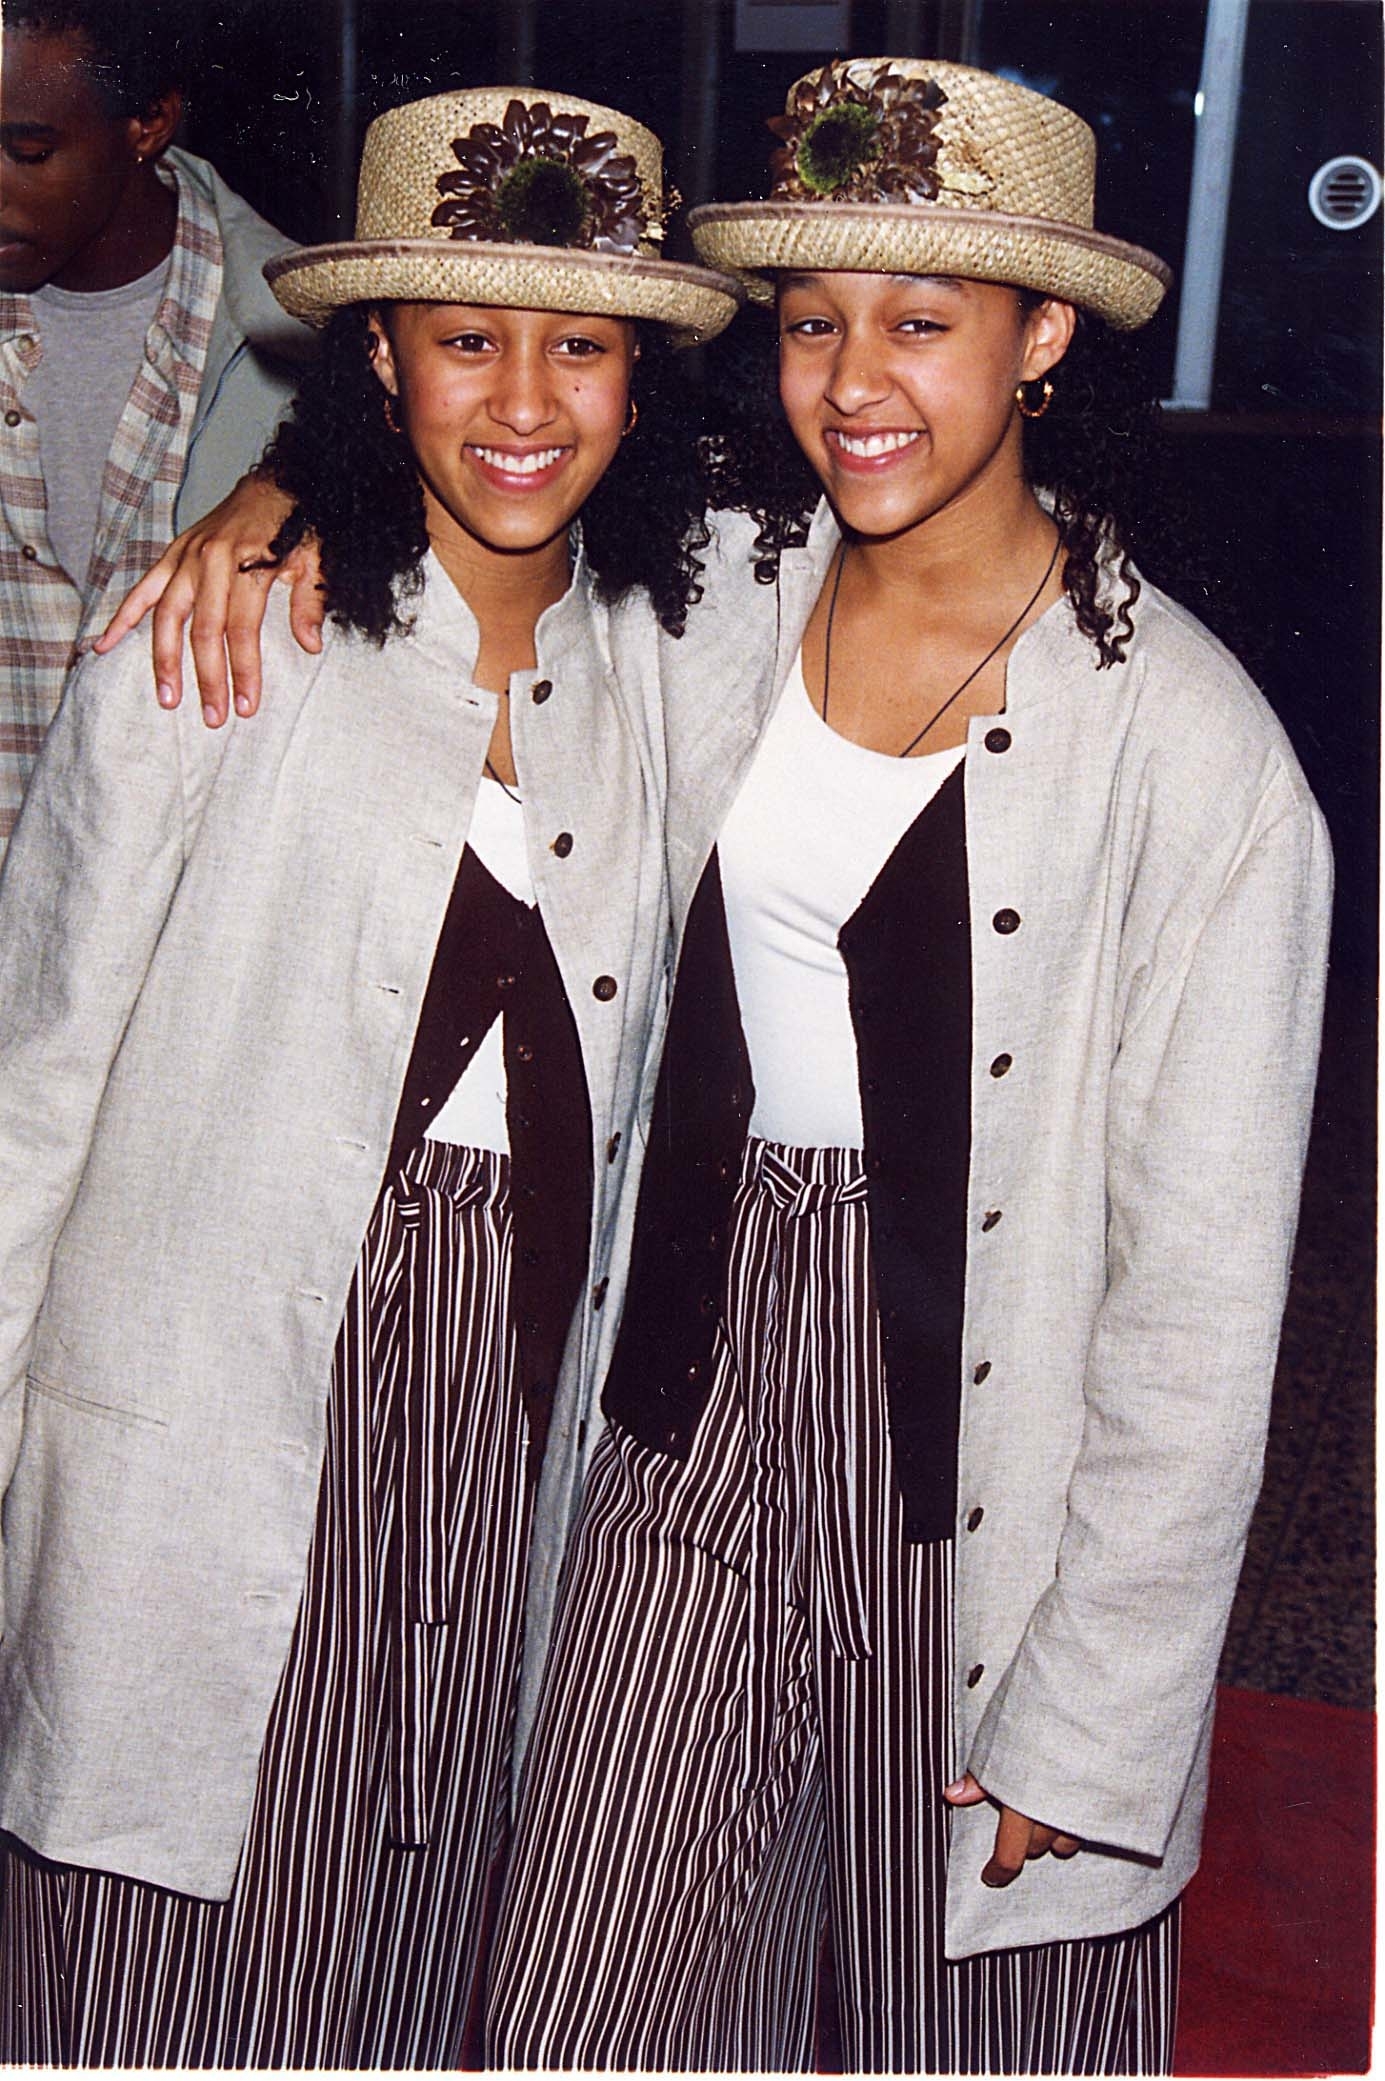 The smiling sisters  in matching outfits: hats, striped pants, vests, and long jackets